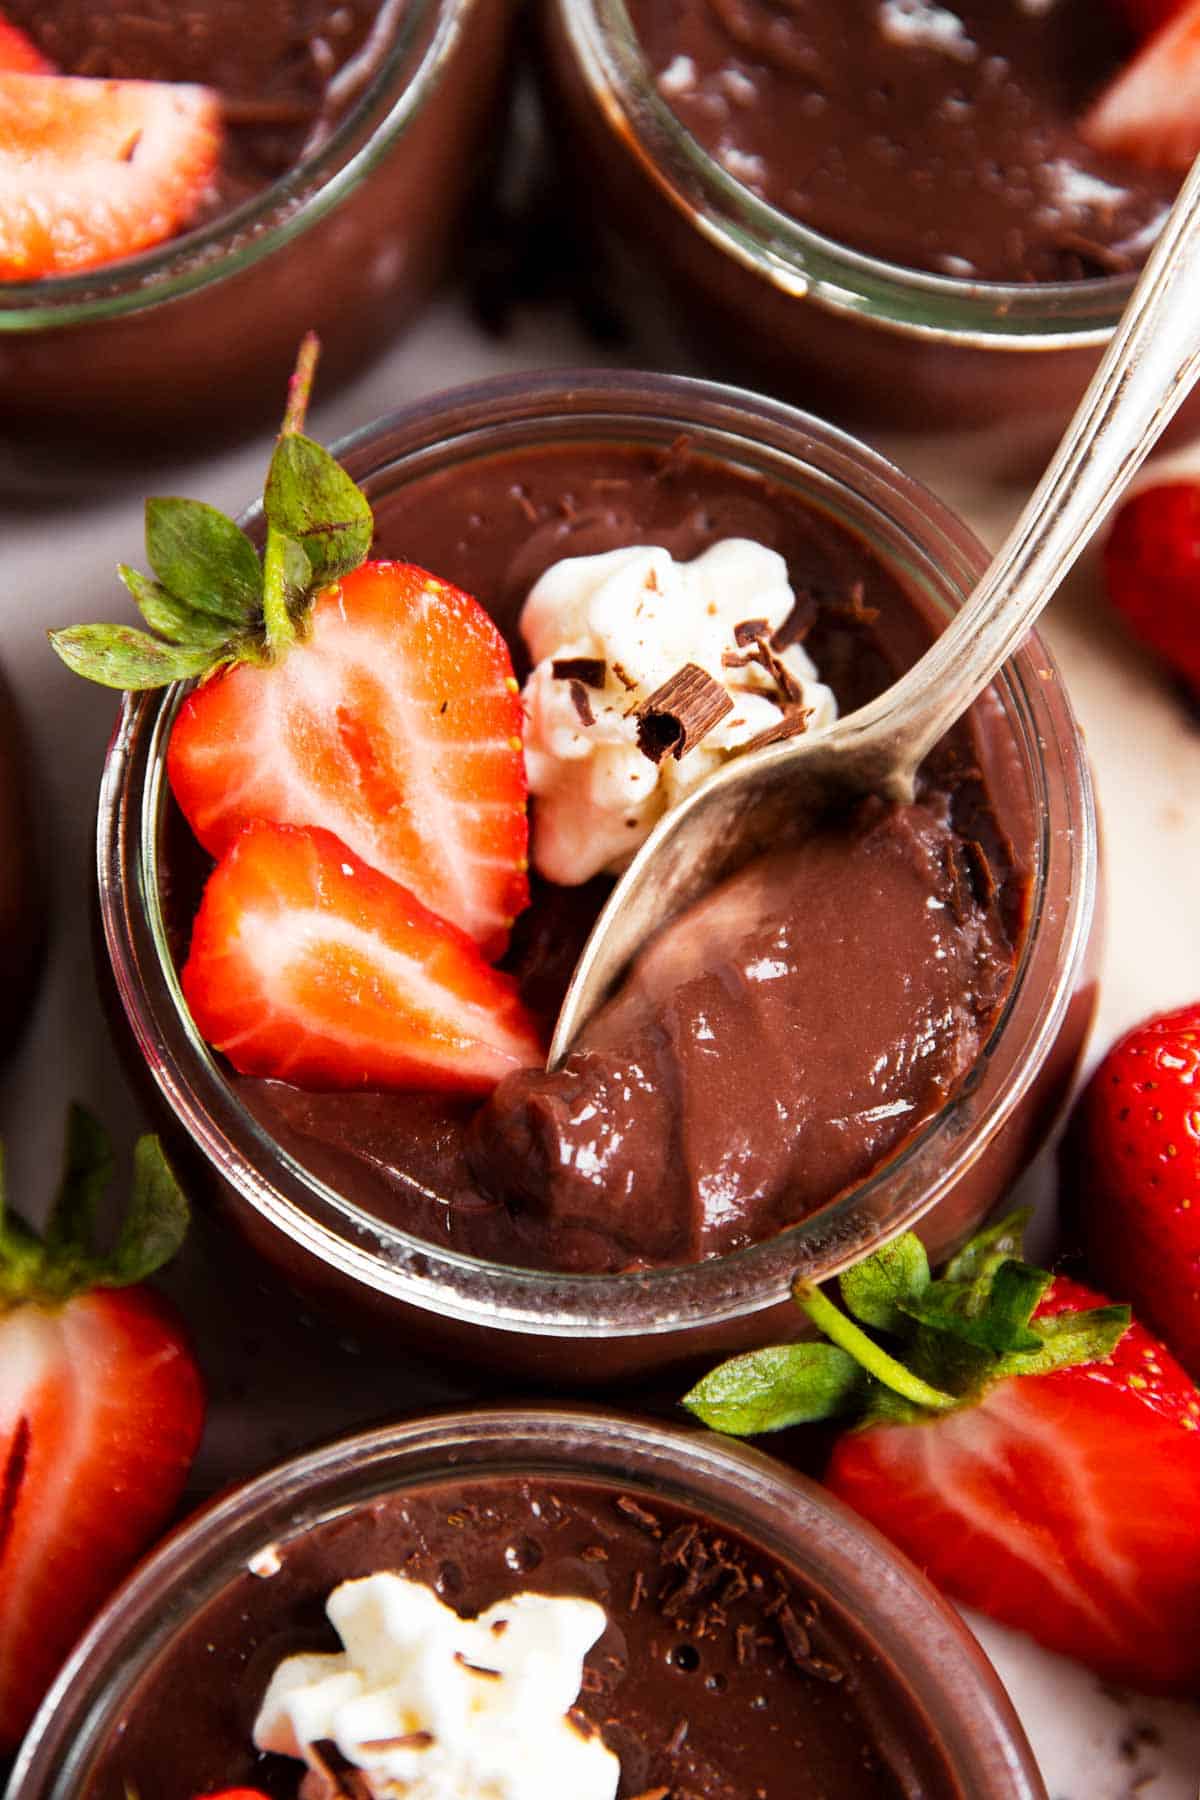 jar of homemade chocolate pudding with strawberries, spoon stuck in pudding